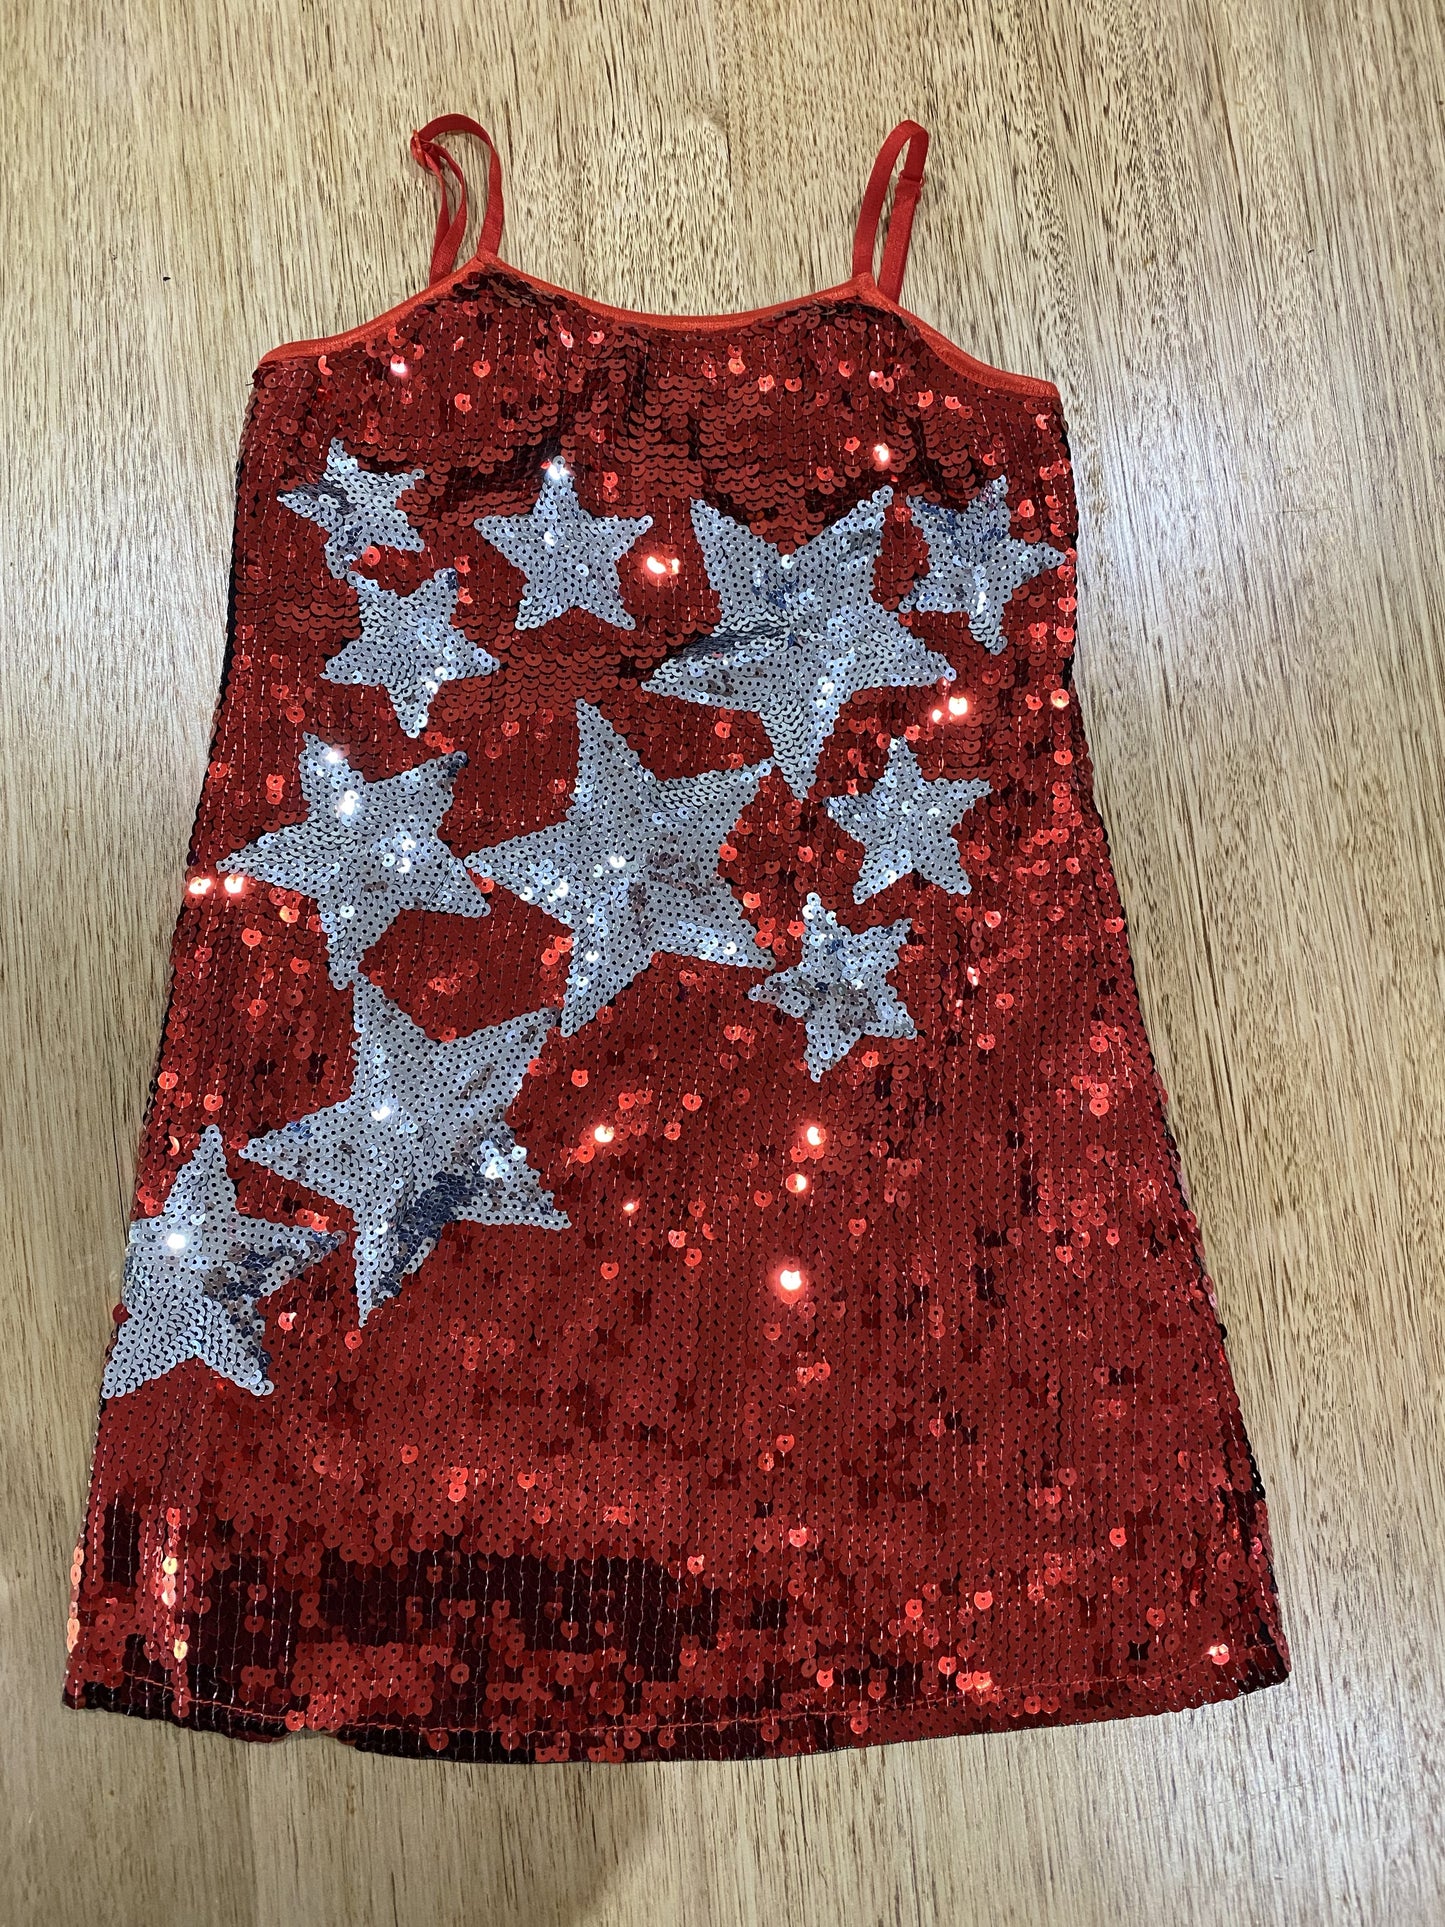 A7654 firecracker - red sequined A line dress with stars - Small Child